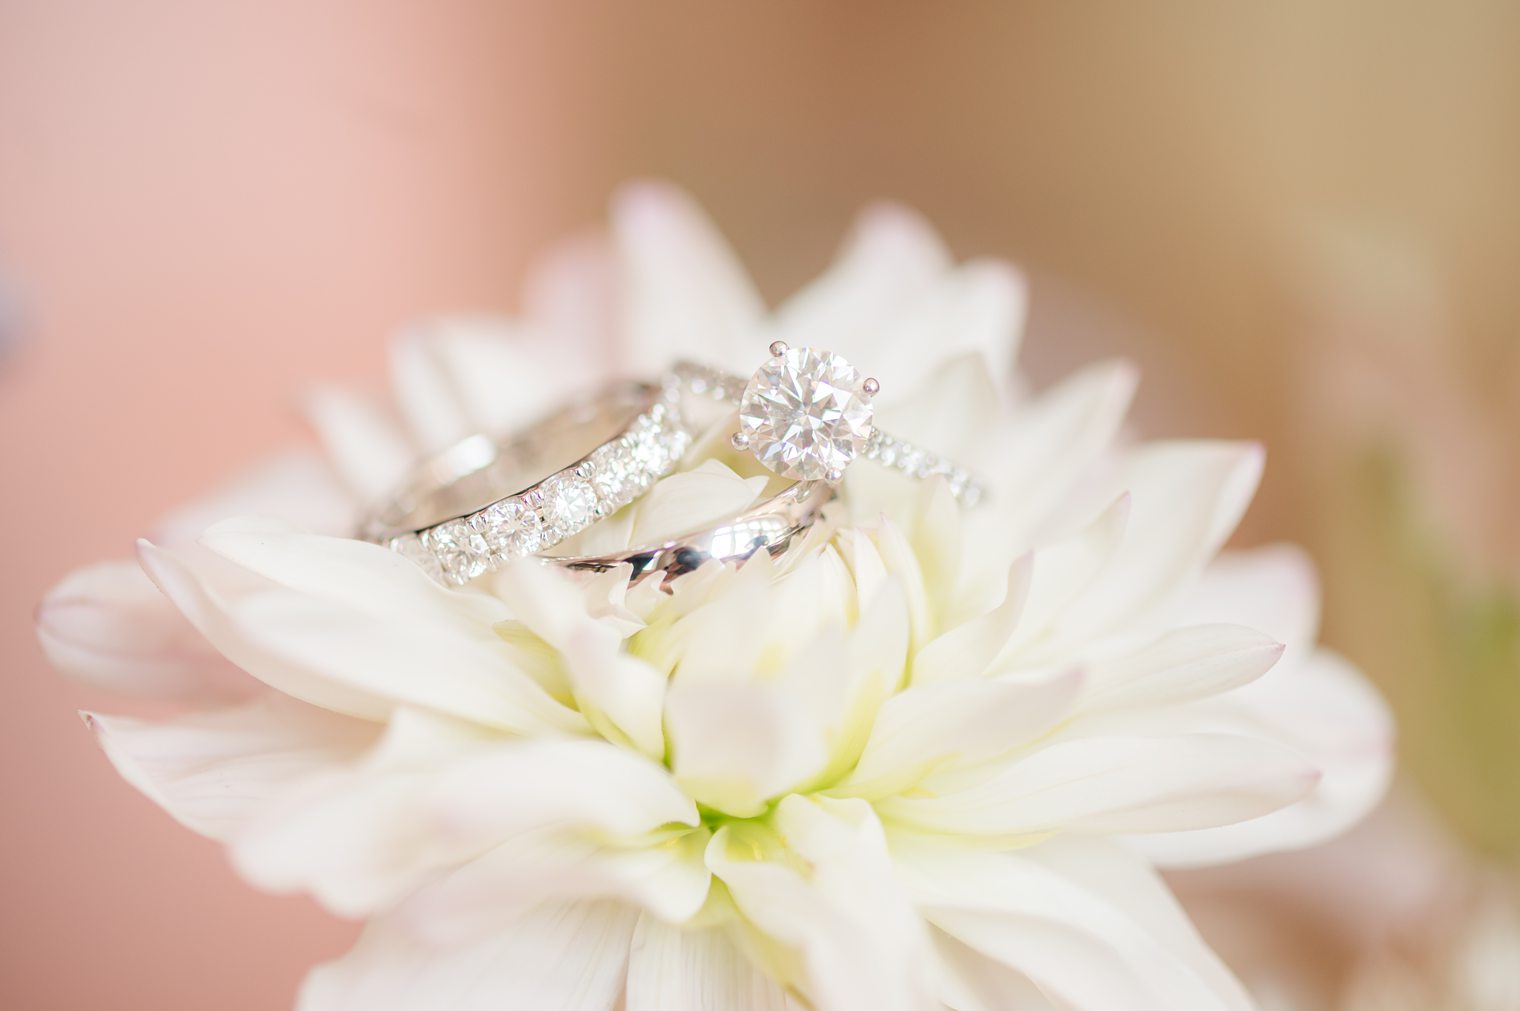 Details of flowers and wedding rings